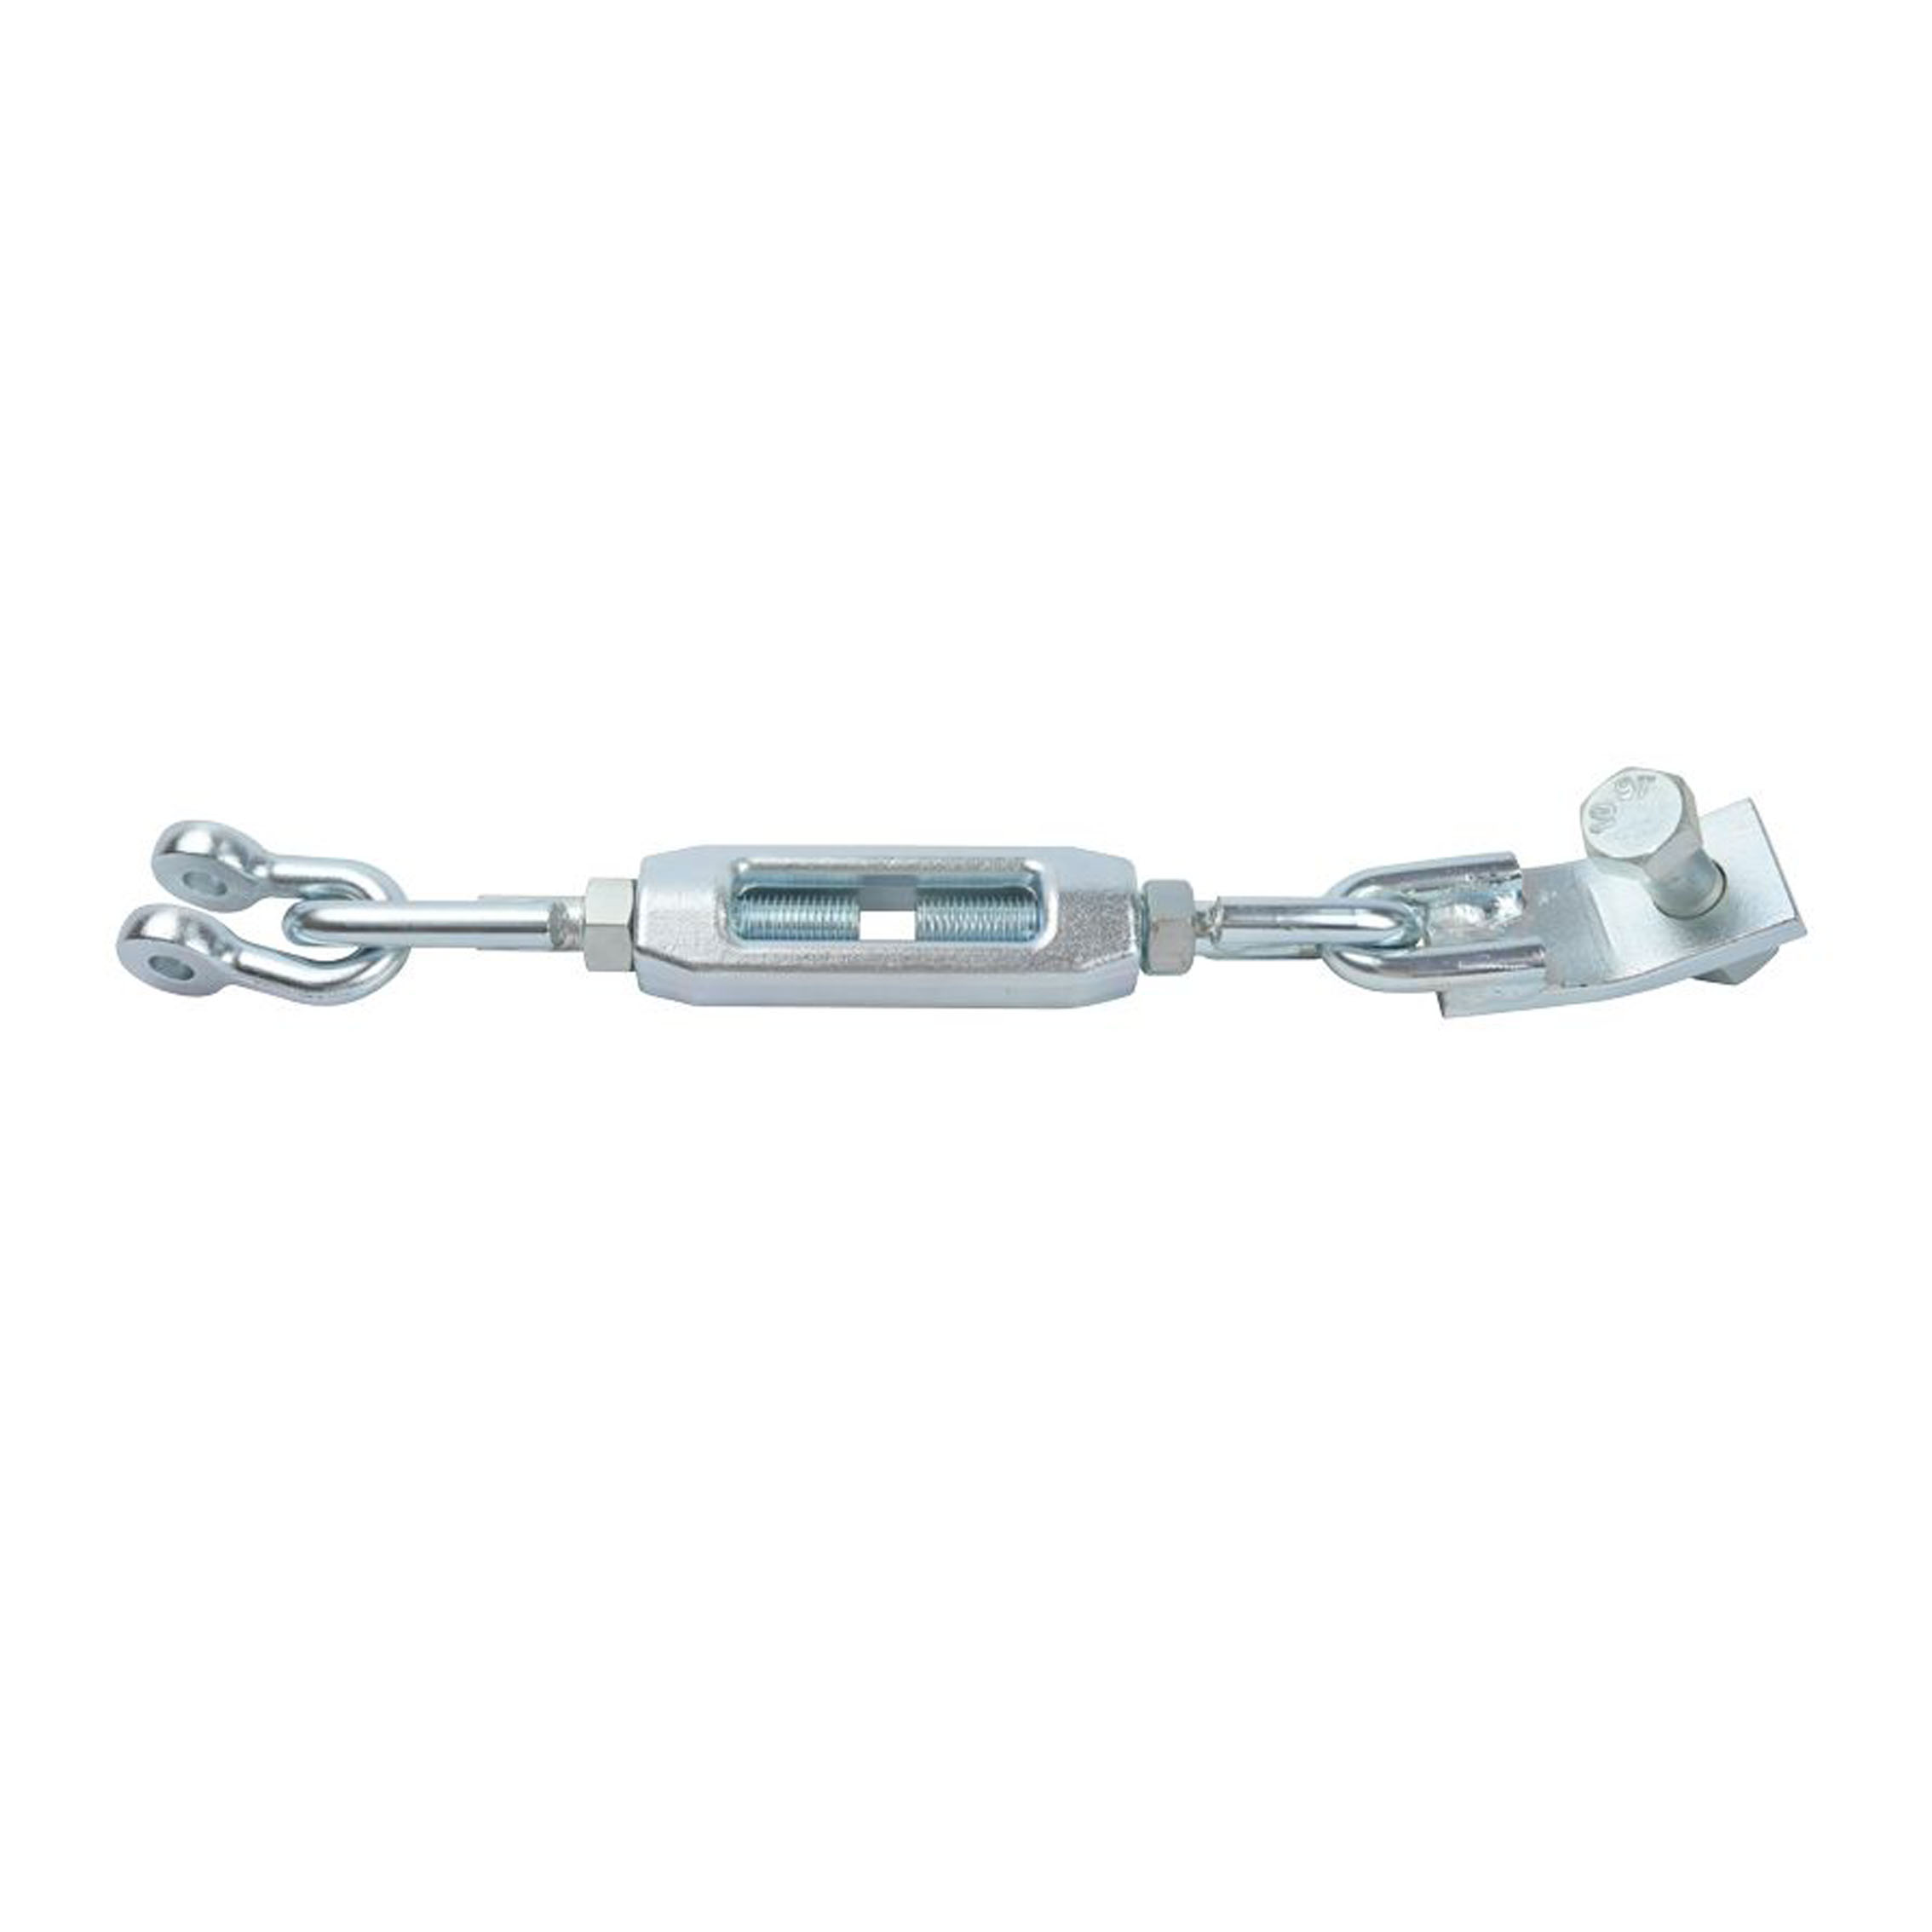 3A275-91100  Check Chain Assembly Fits For Kubota